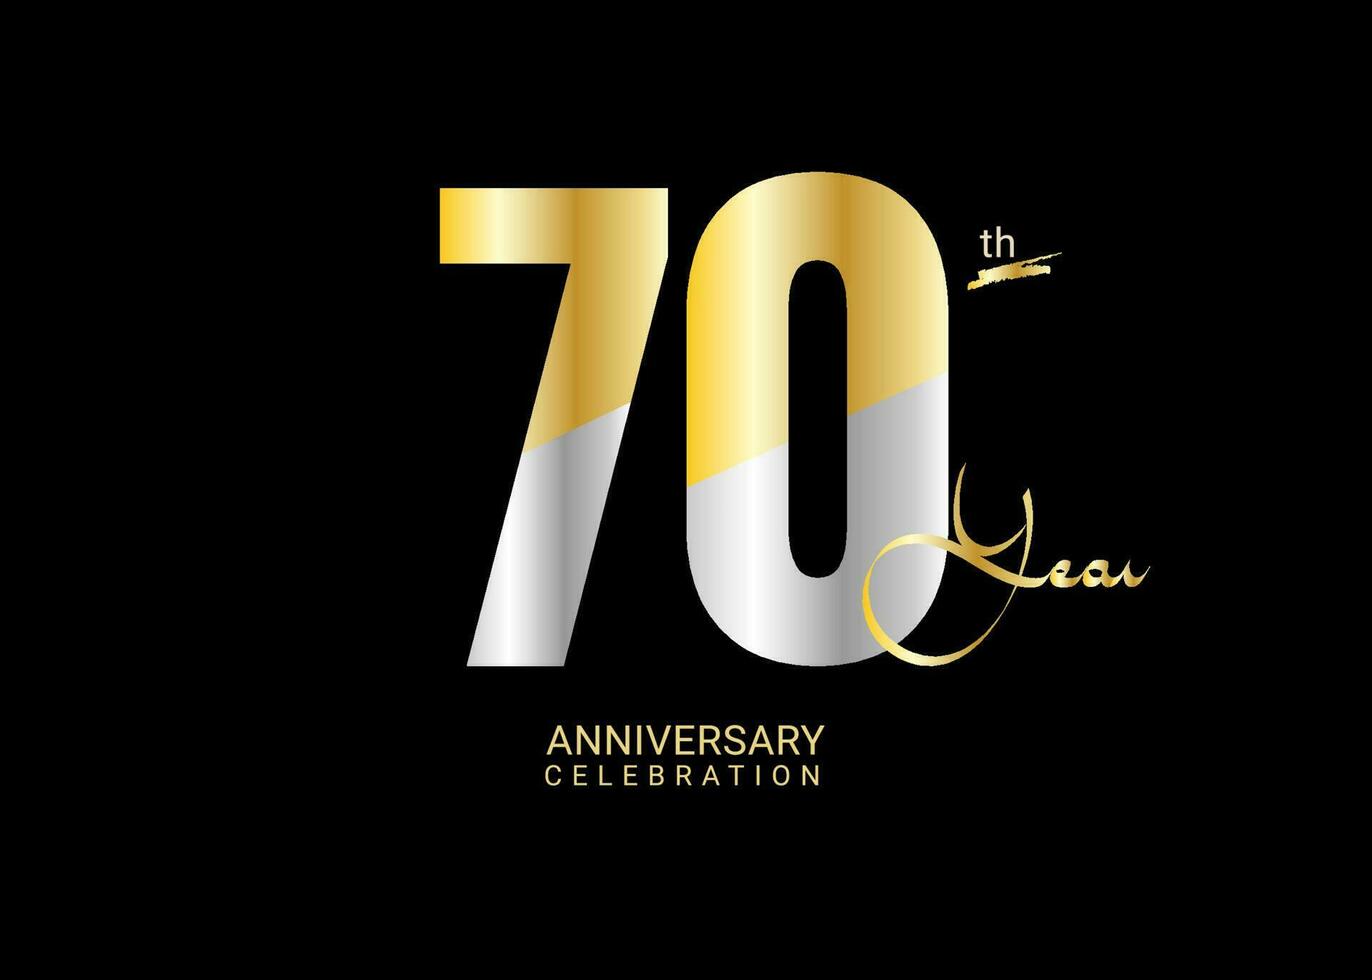 70 Years Anniversary Celebration gold and silver Vector Template, 70 number logo design, 70th Birthday Logo,  logotype Anniversary, Vector Anniversary For Celebration, poster, Invitation Card